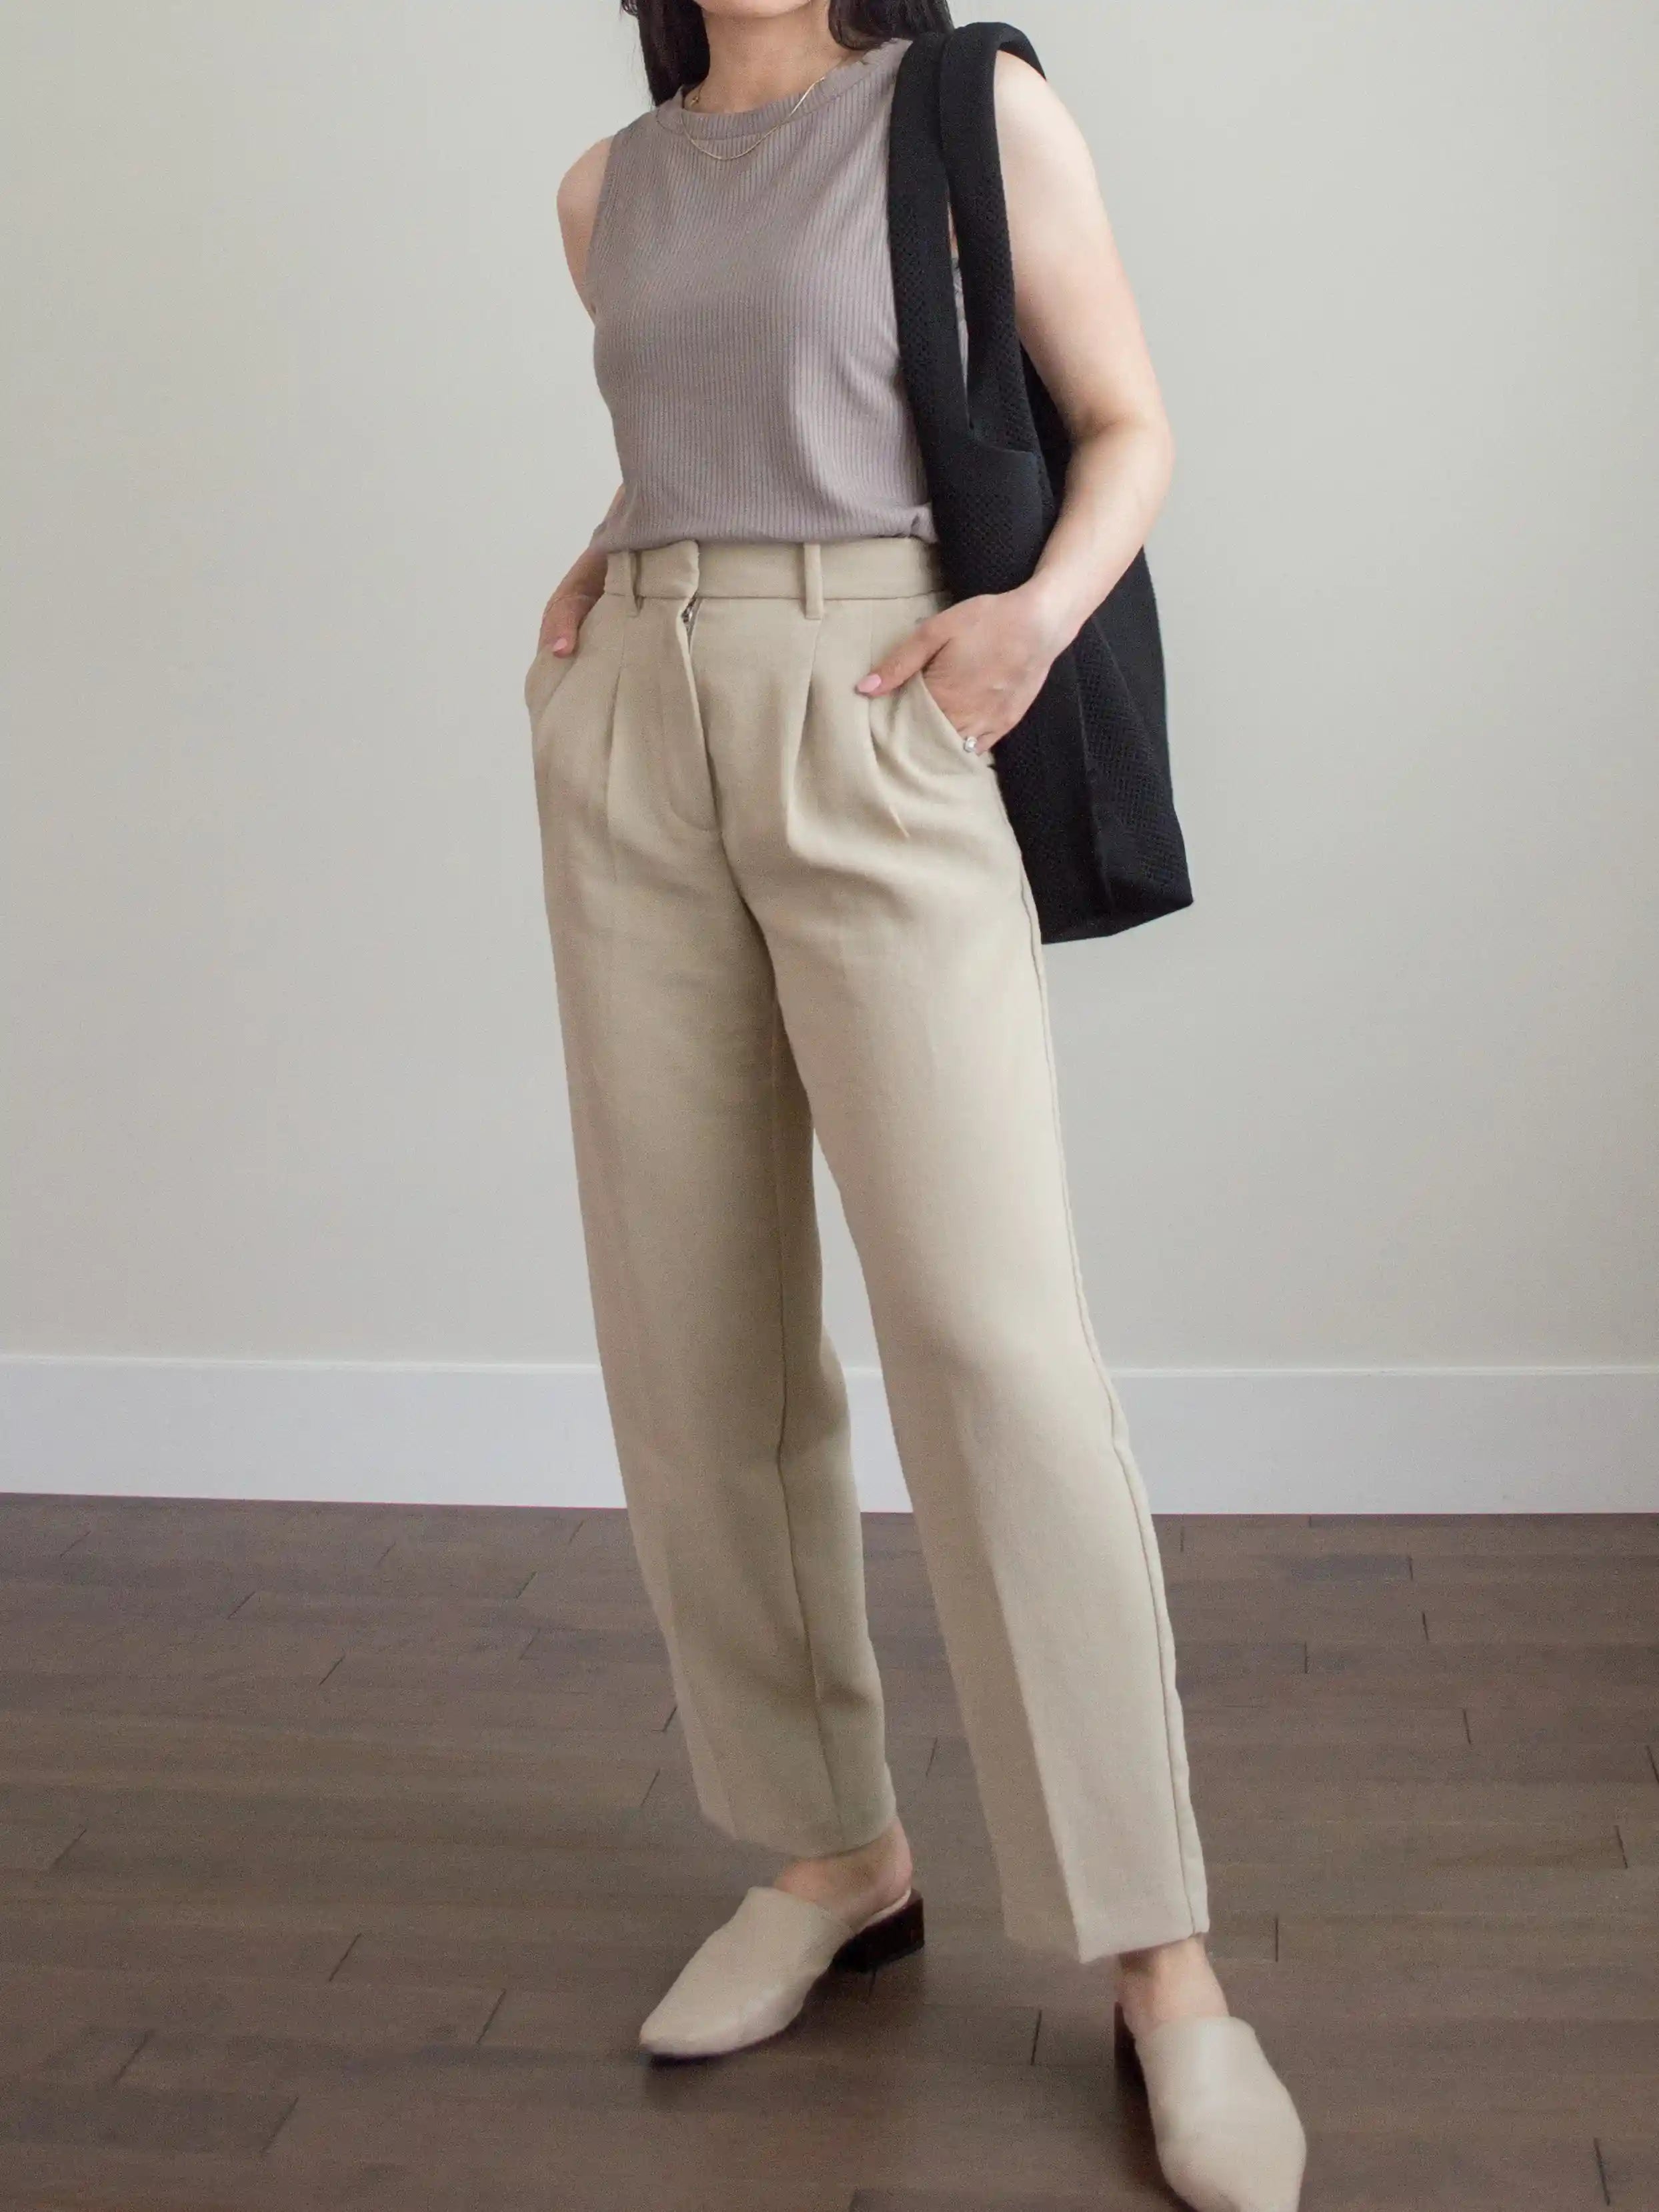 How to Wear and Style Knit Pants for Your Body Shape